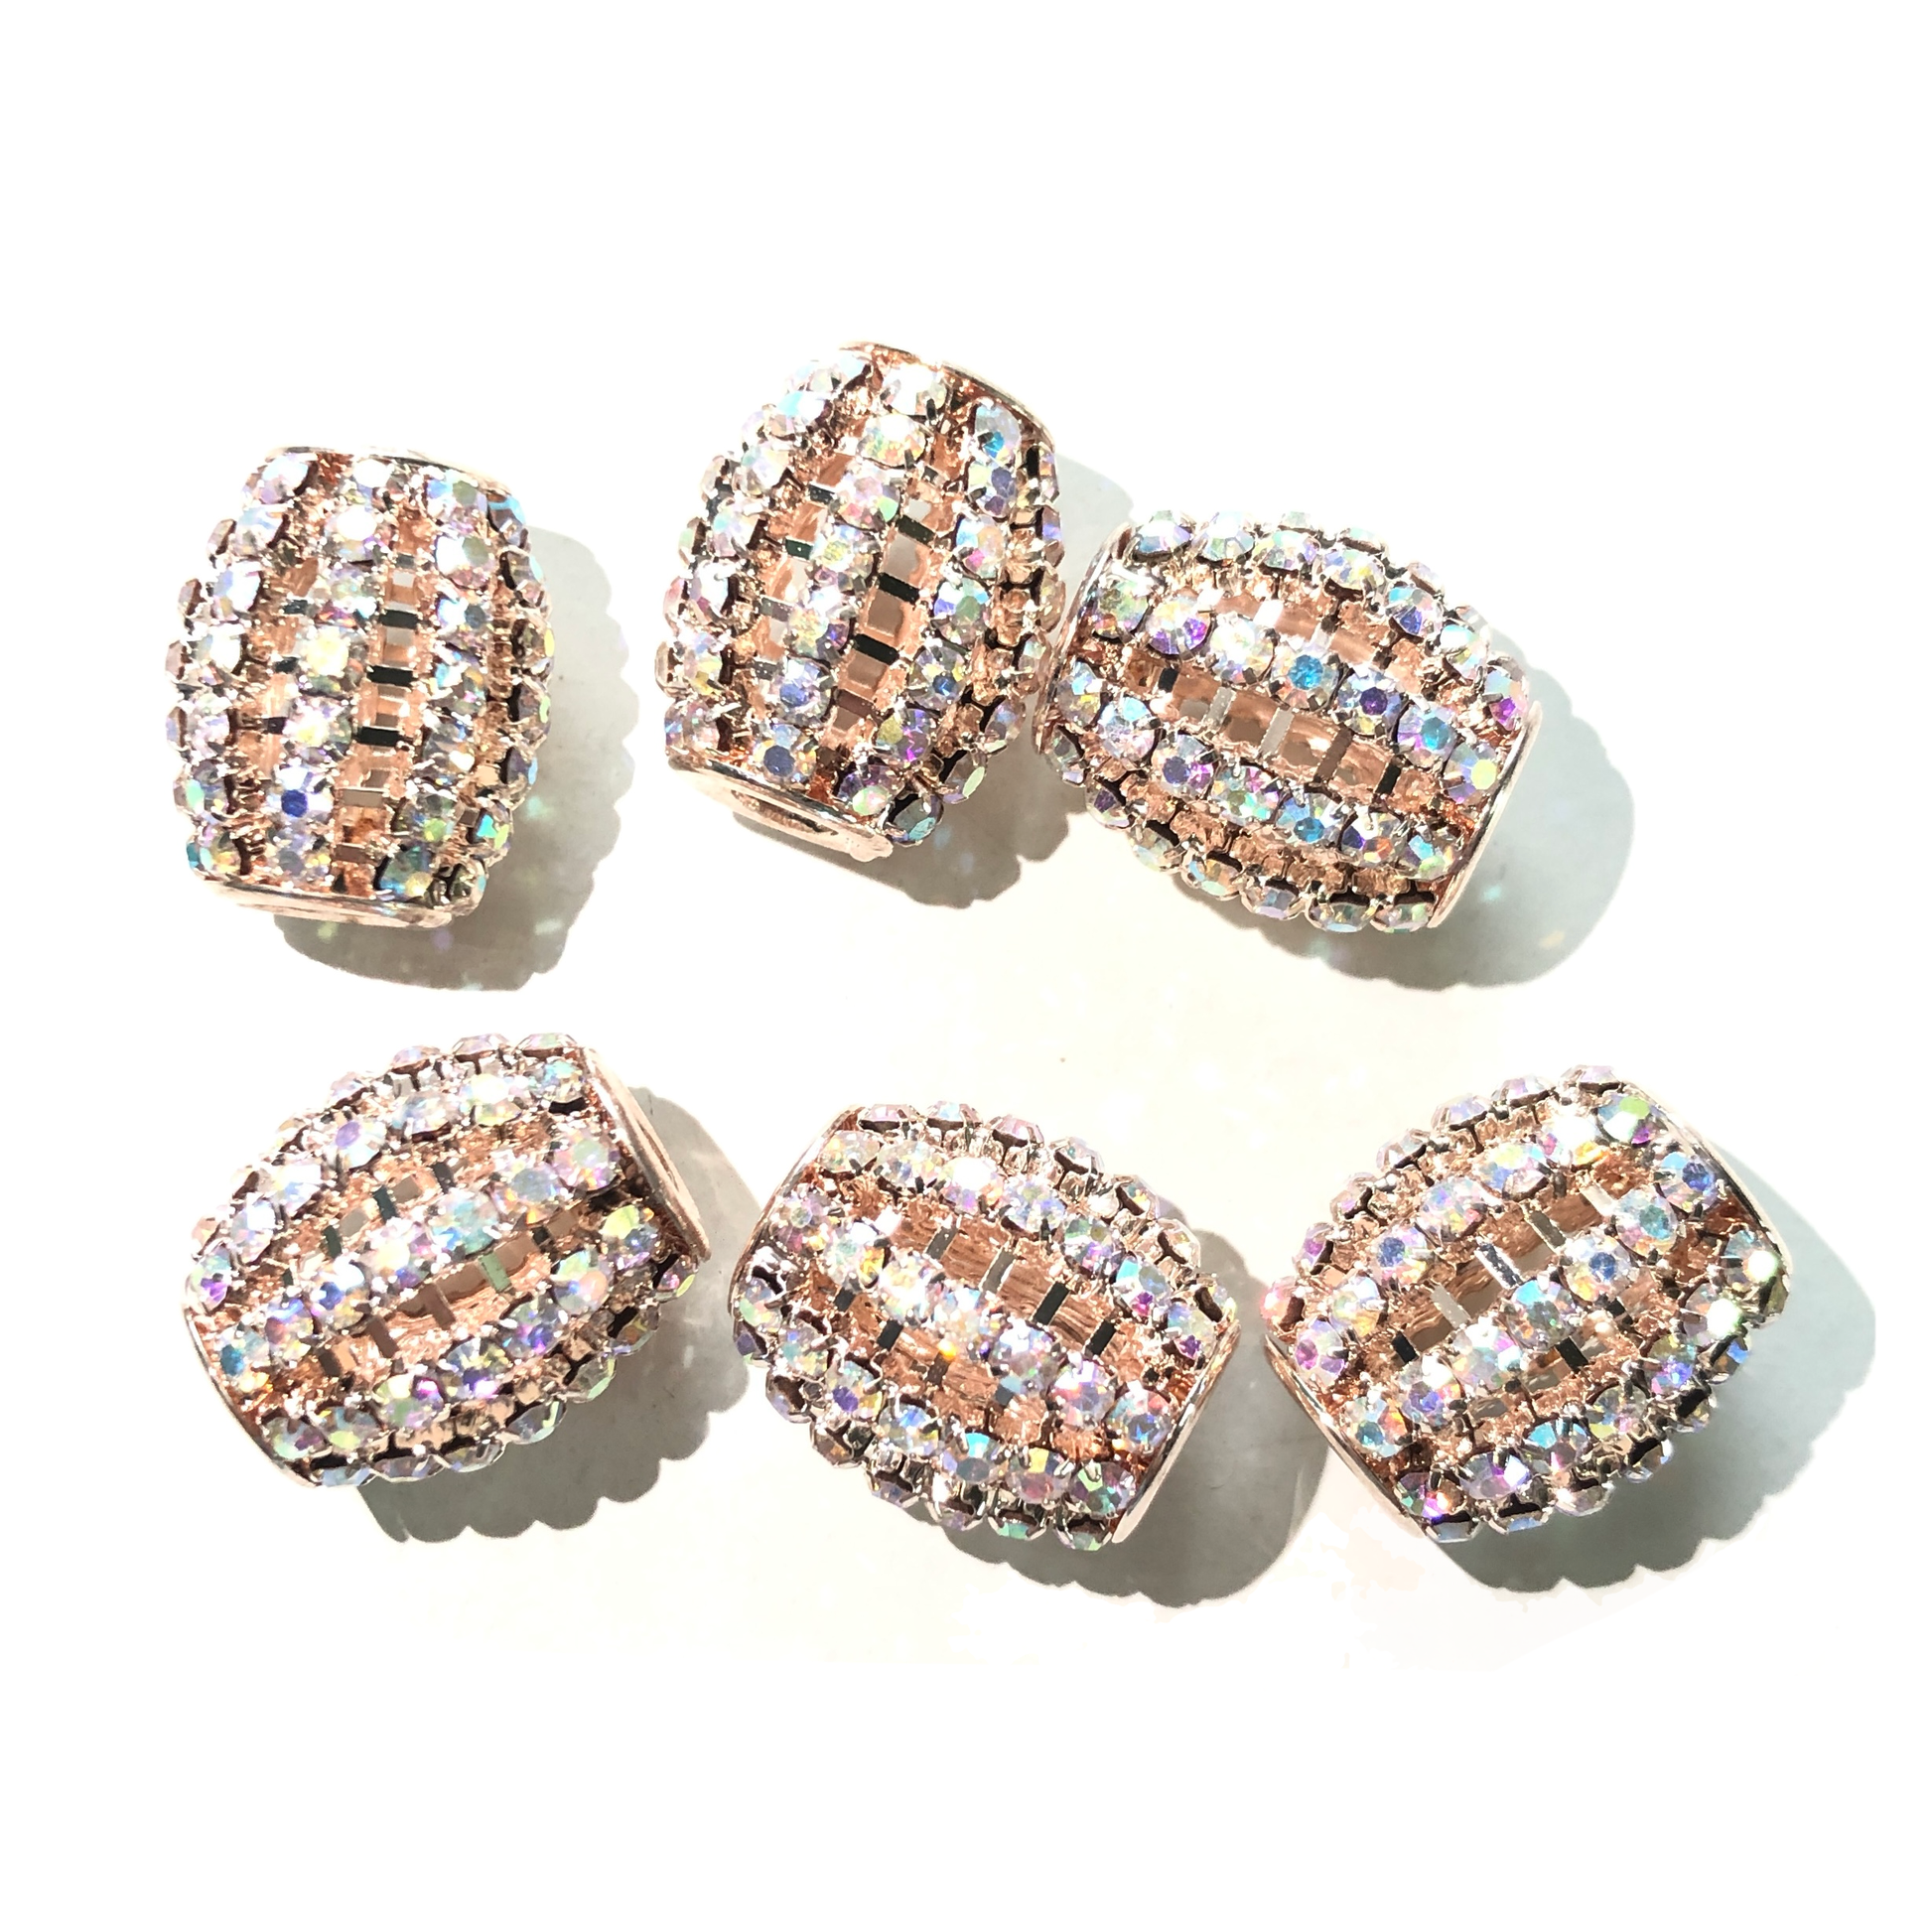 20pcs/lot 18*15mm Clear AB & Multicolor Rhinestone Alloy Olive Spacers Clear AB on Rose Gold Alloy Spacers Colorful Zirconia New Spacers Arrivals Charms Beads Beyond